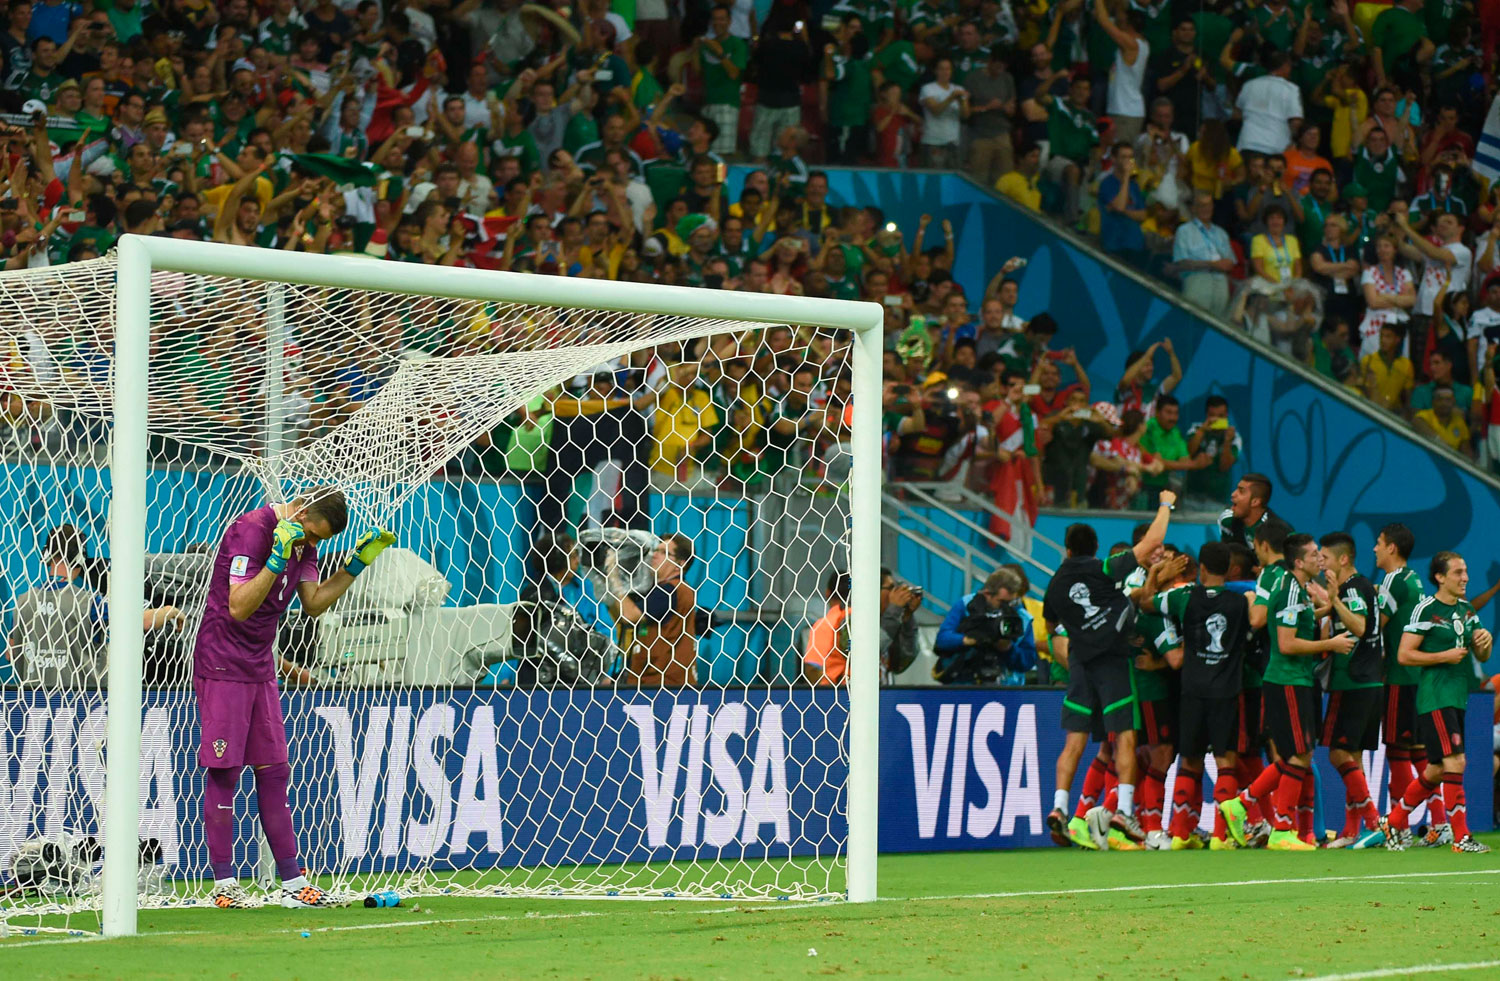 Croatia's goalkeeper Stipe Pletikosa reacts after Mexico scored in a match between Croatia and Mexico at the Pernambuco Arena in Recife, Brazil on June 23, 2014.